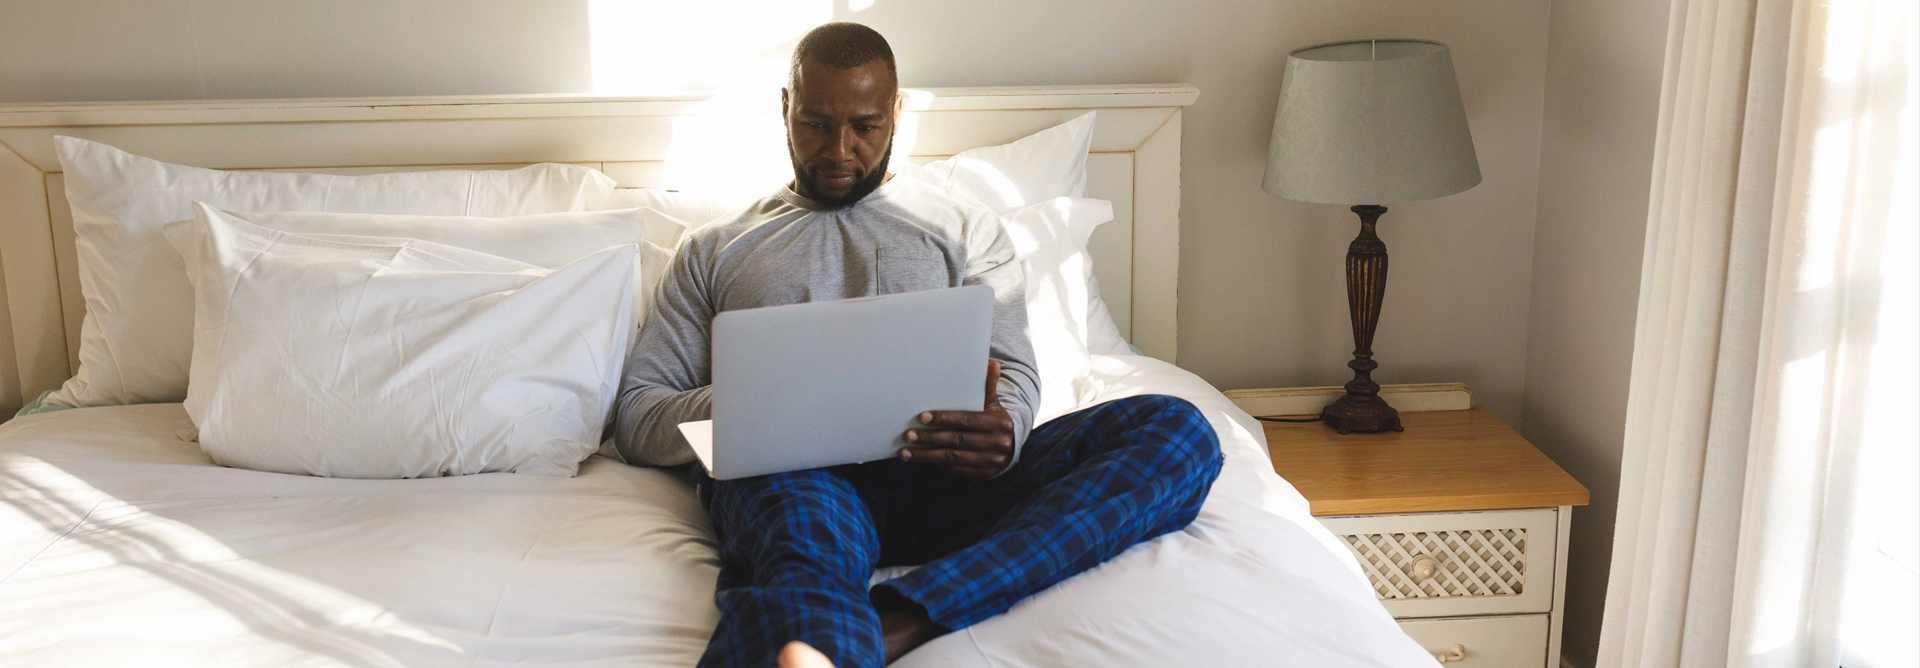 man using laptop and lying on bed